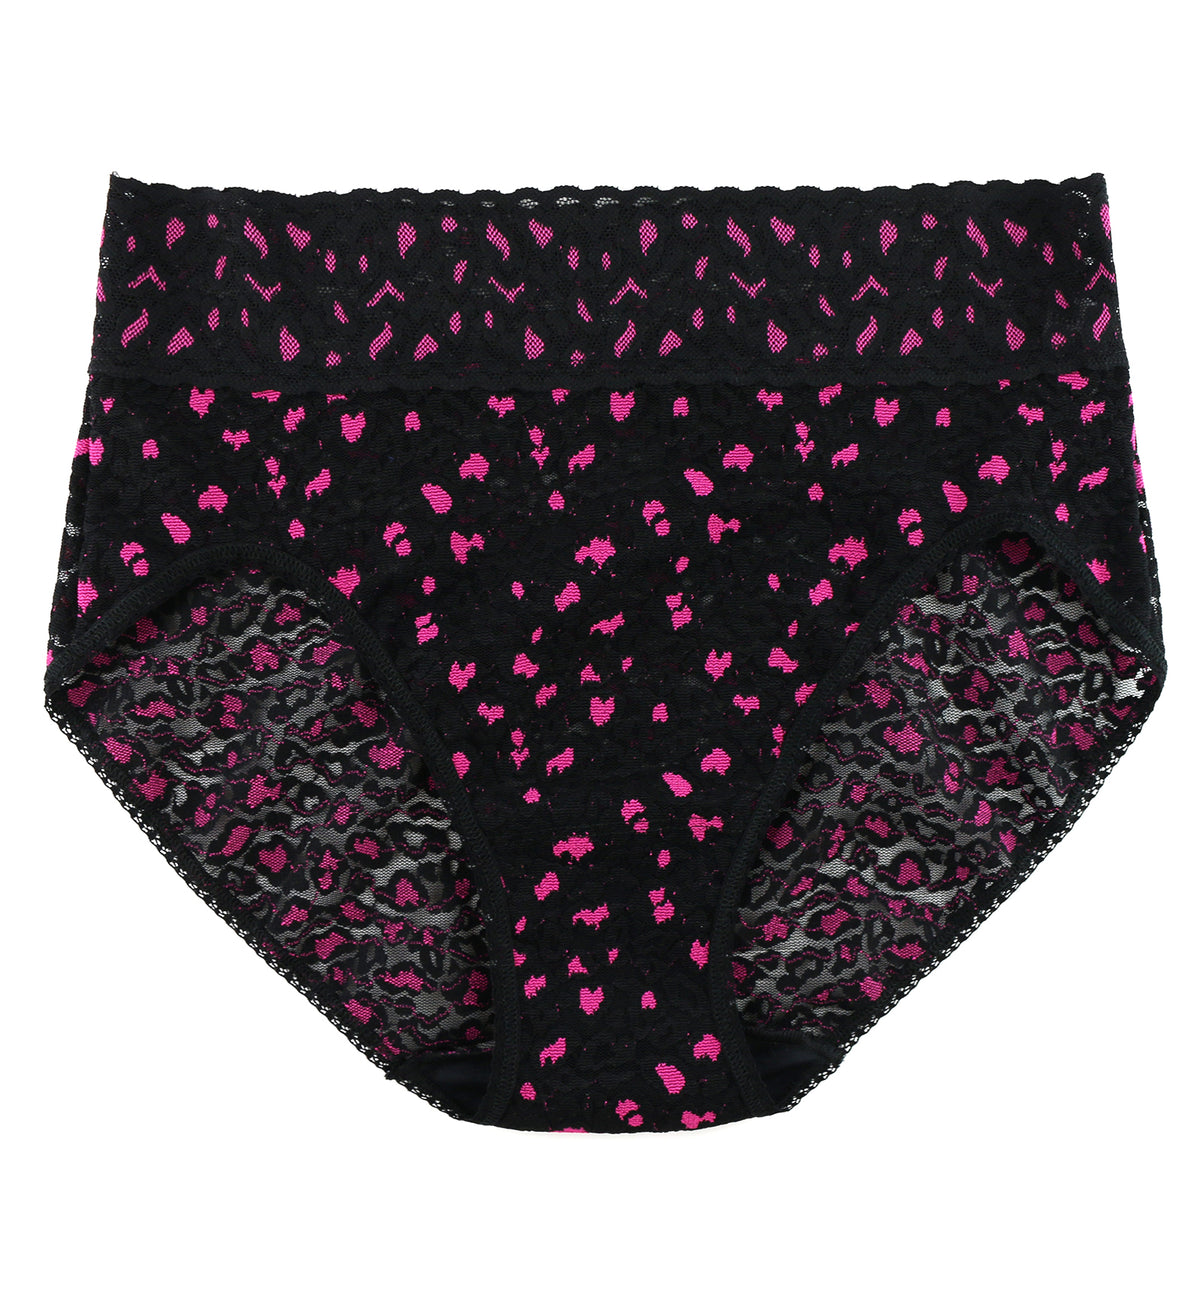 Hanky Panky Cross Dyed Leopard French Brief (7J2461),Small,Black/Tulip Pink - Black/Tulip Pink,Small